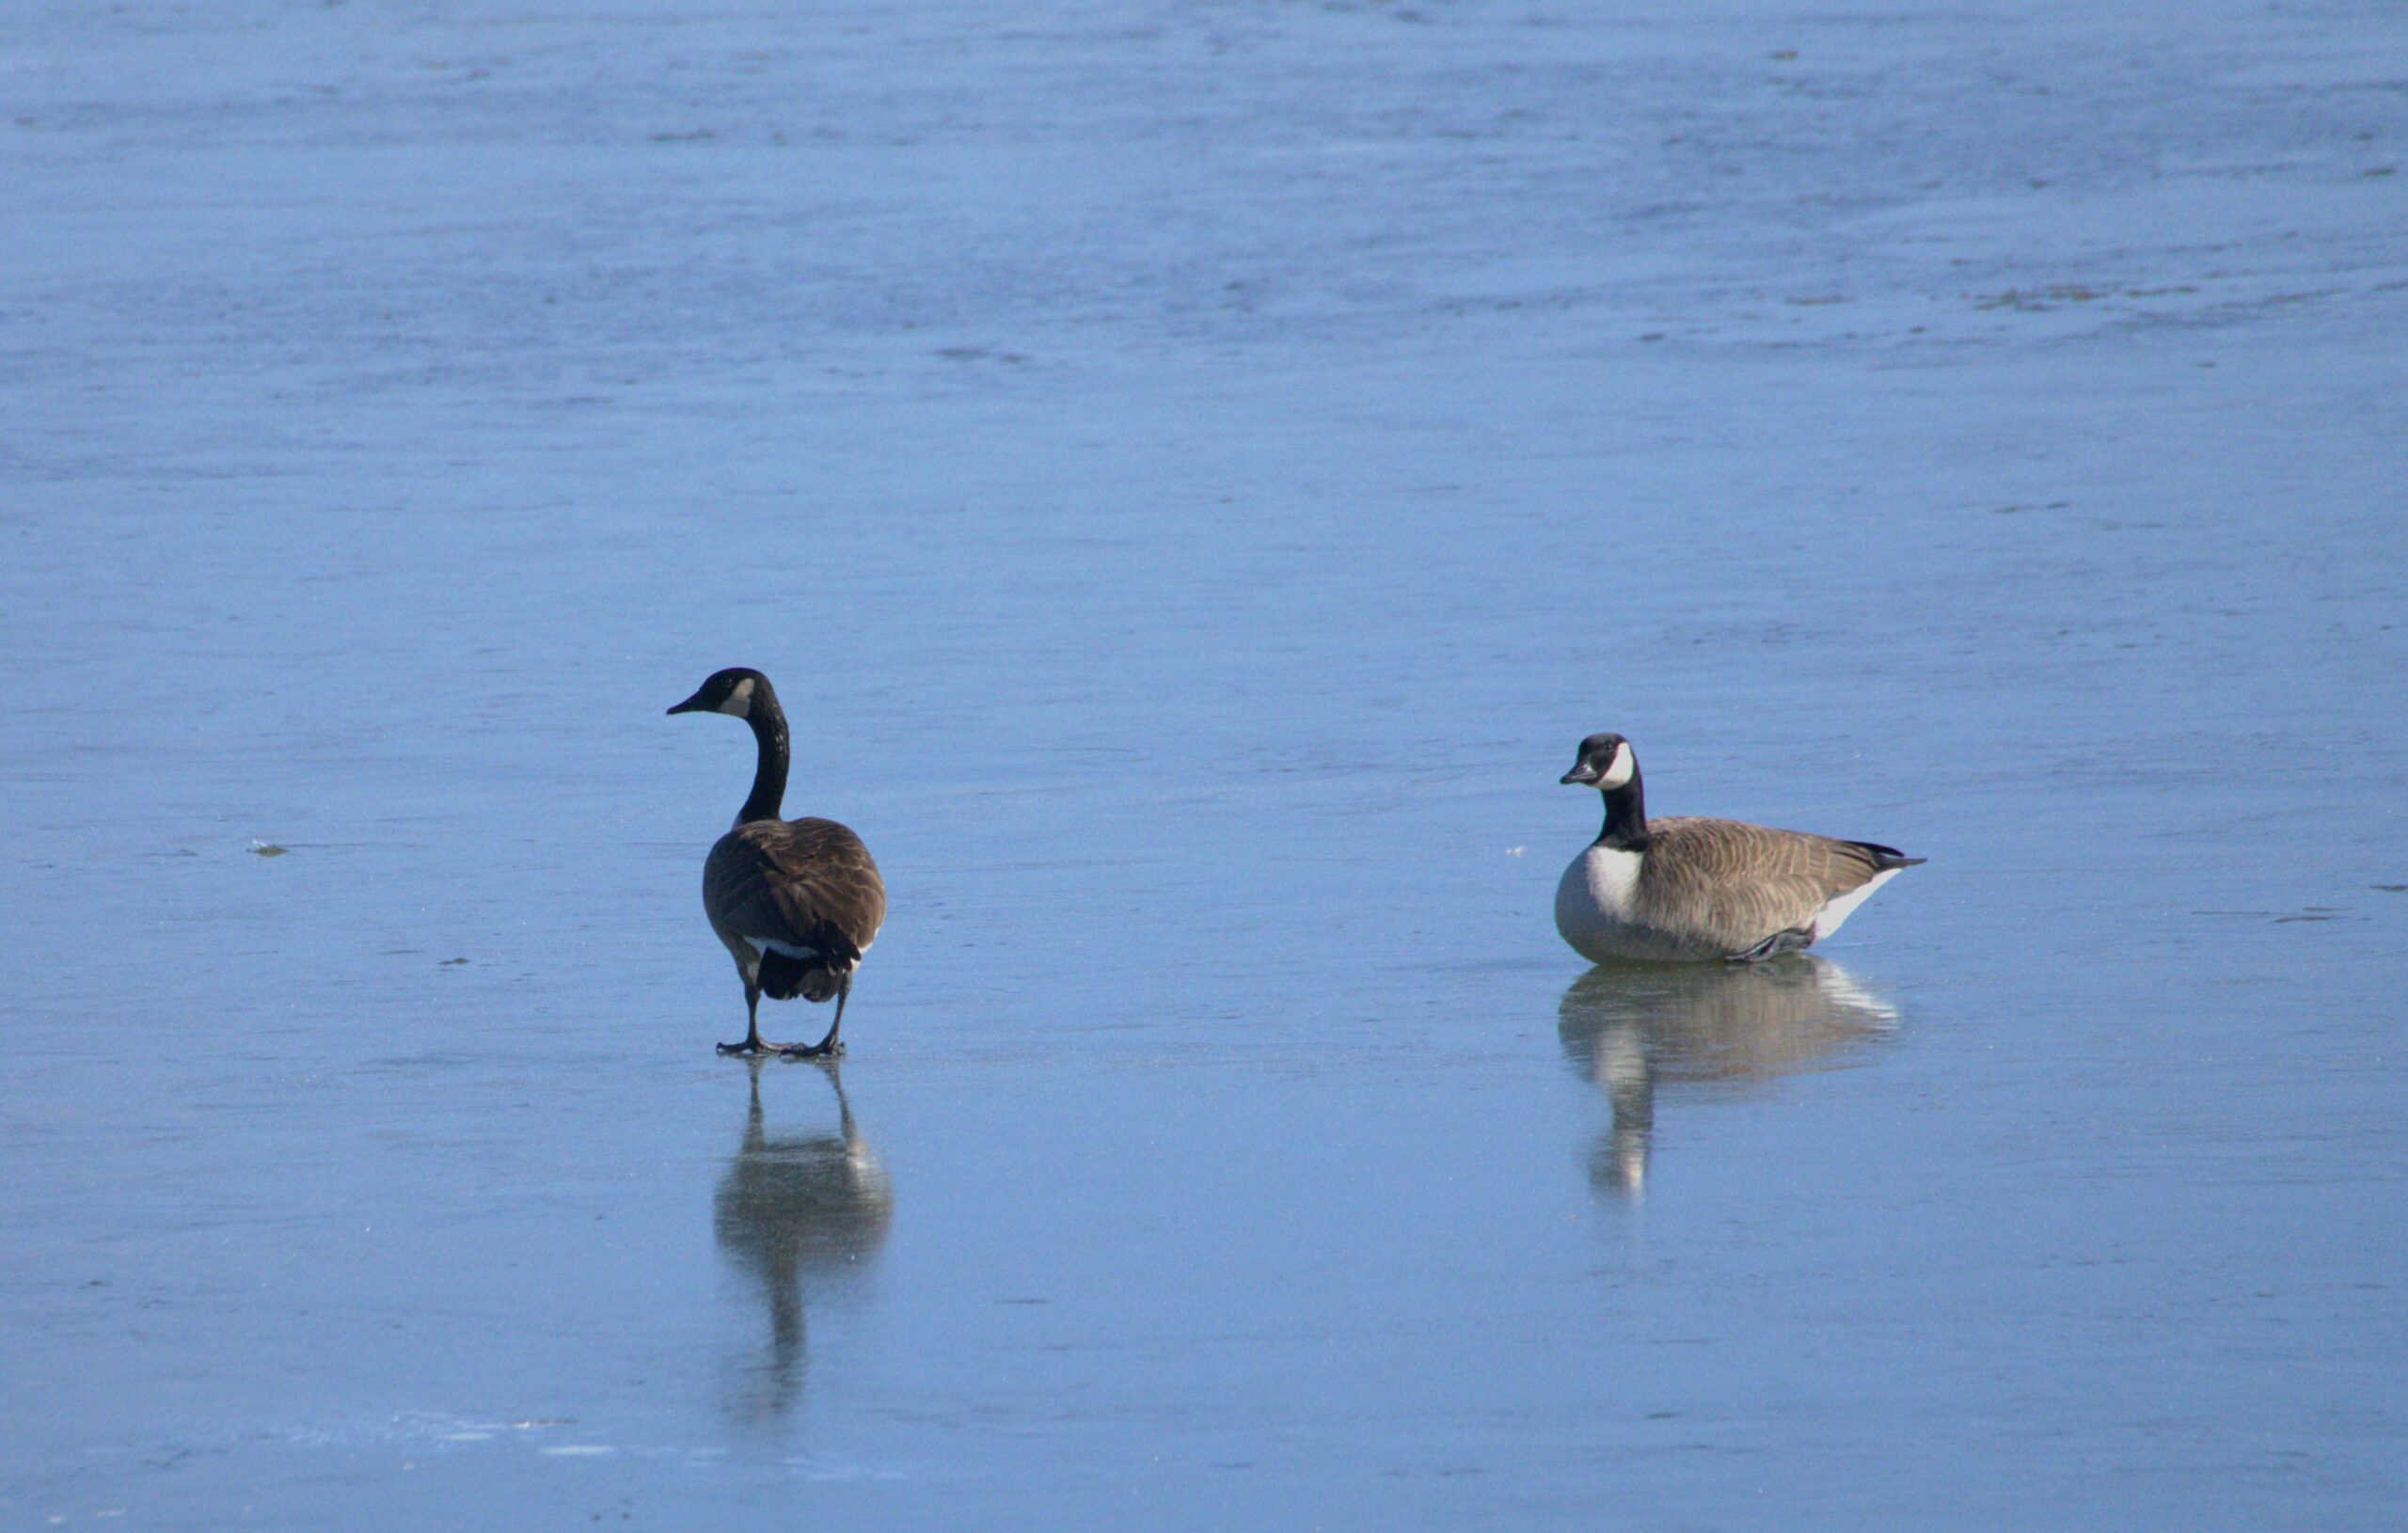 A Canada Goose walks on a frozen river while another goose looks on